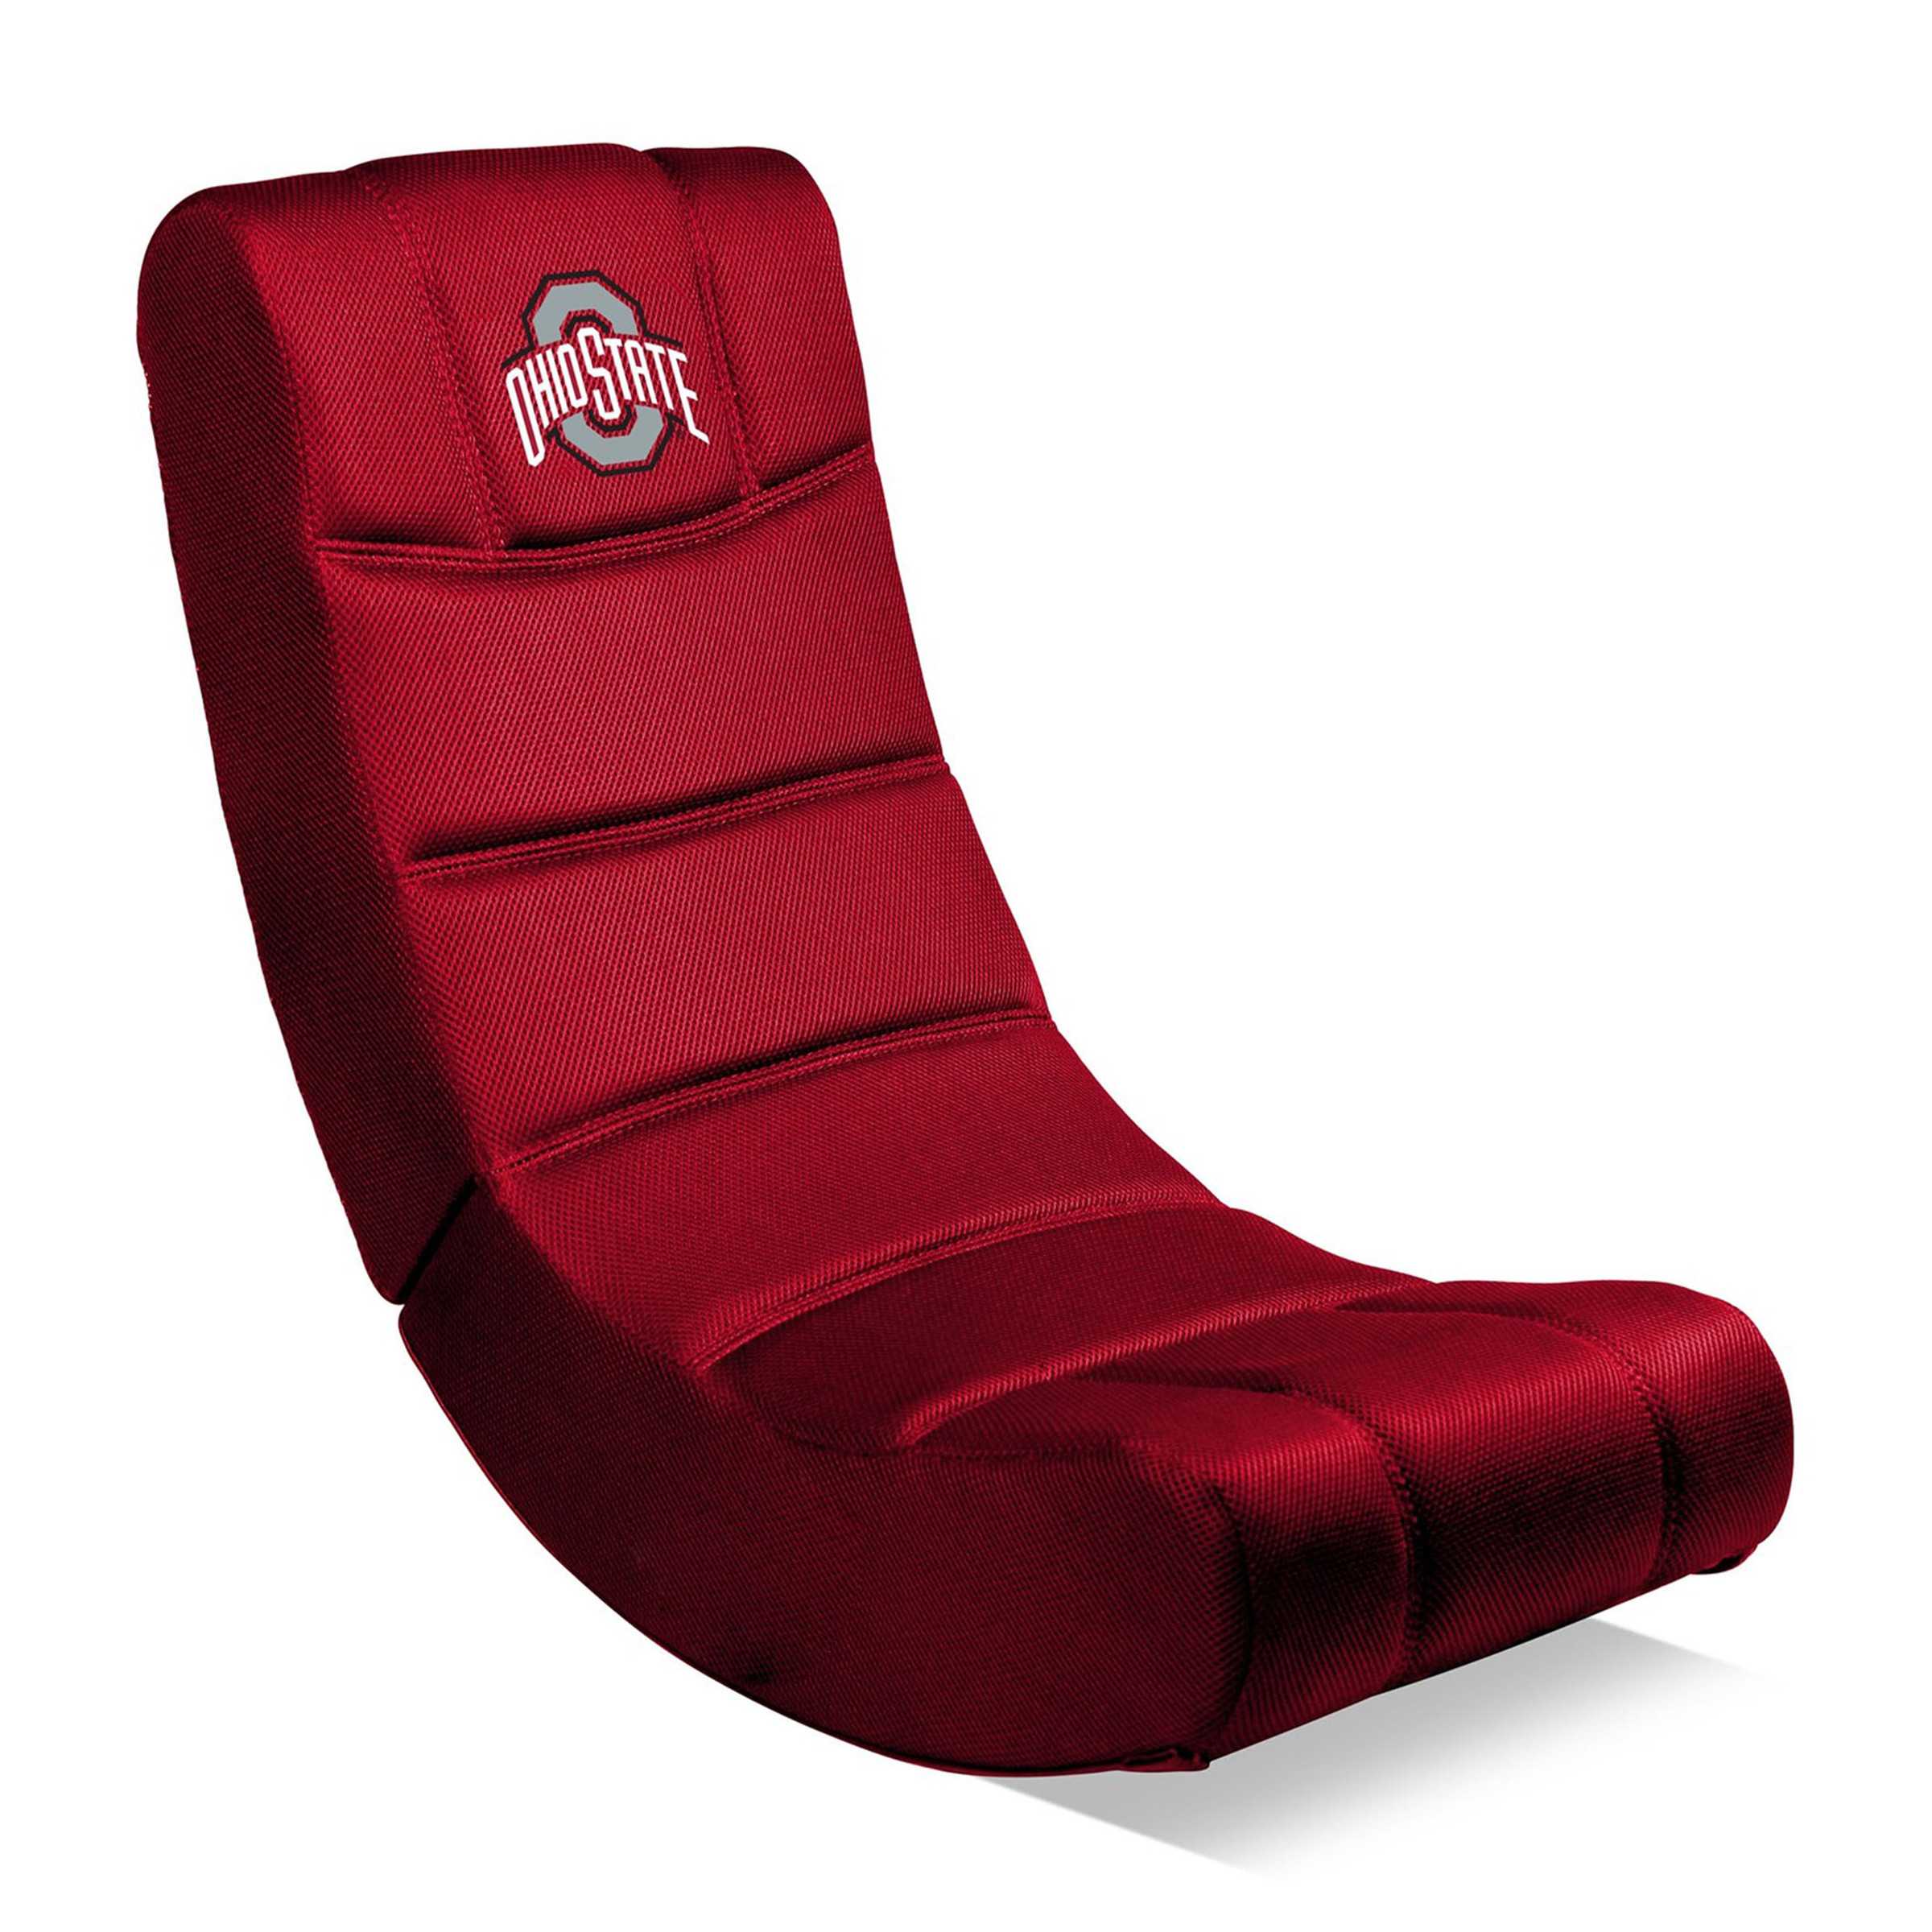 OHIO STATE VIDEO CHAIR